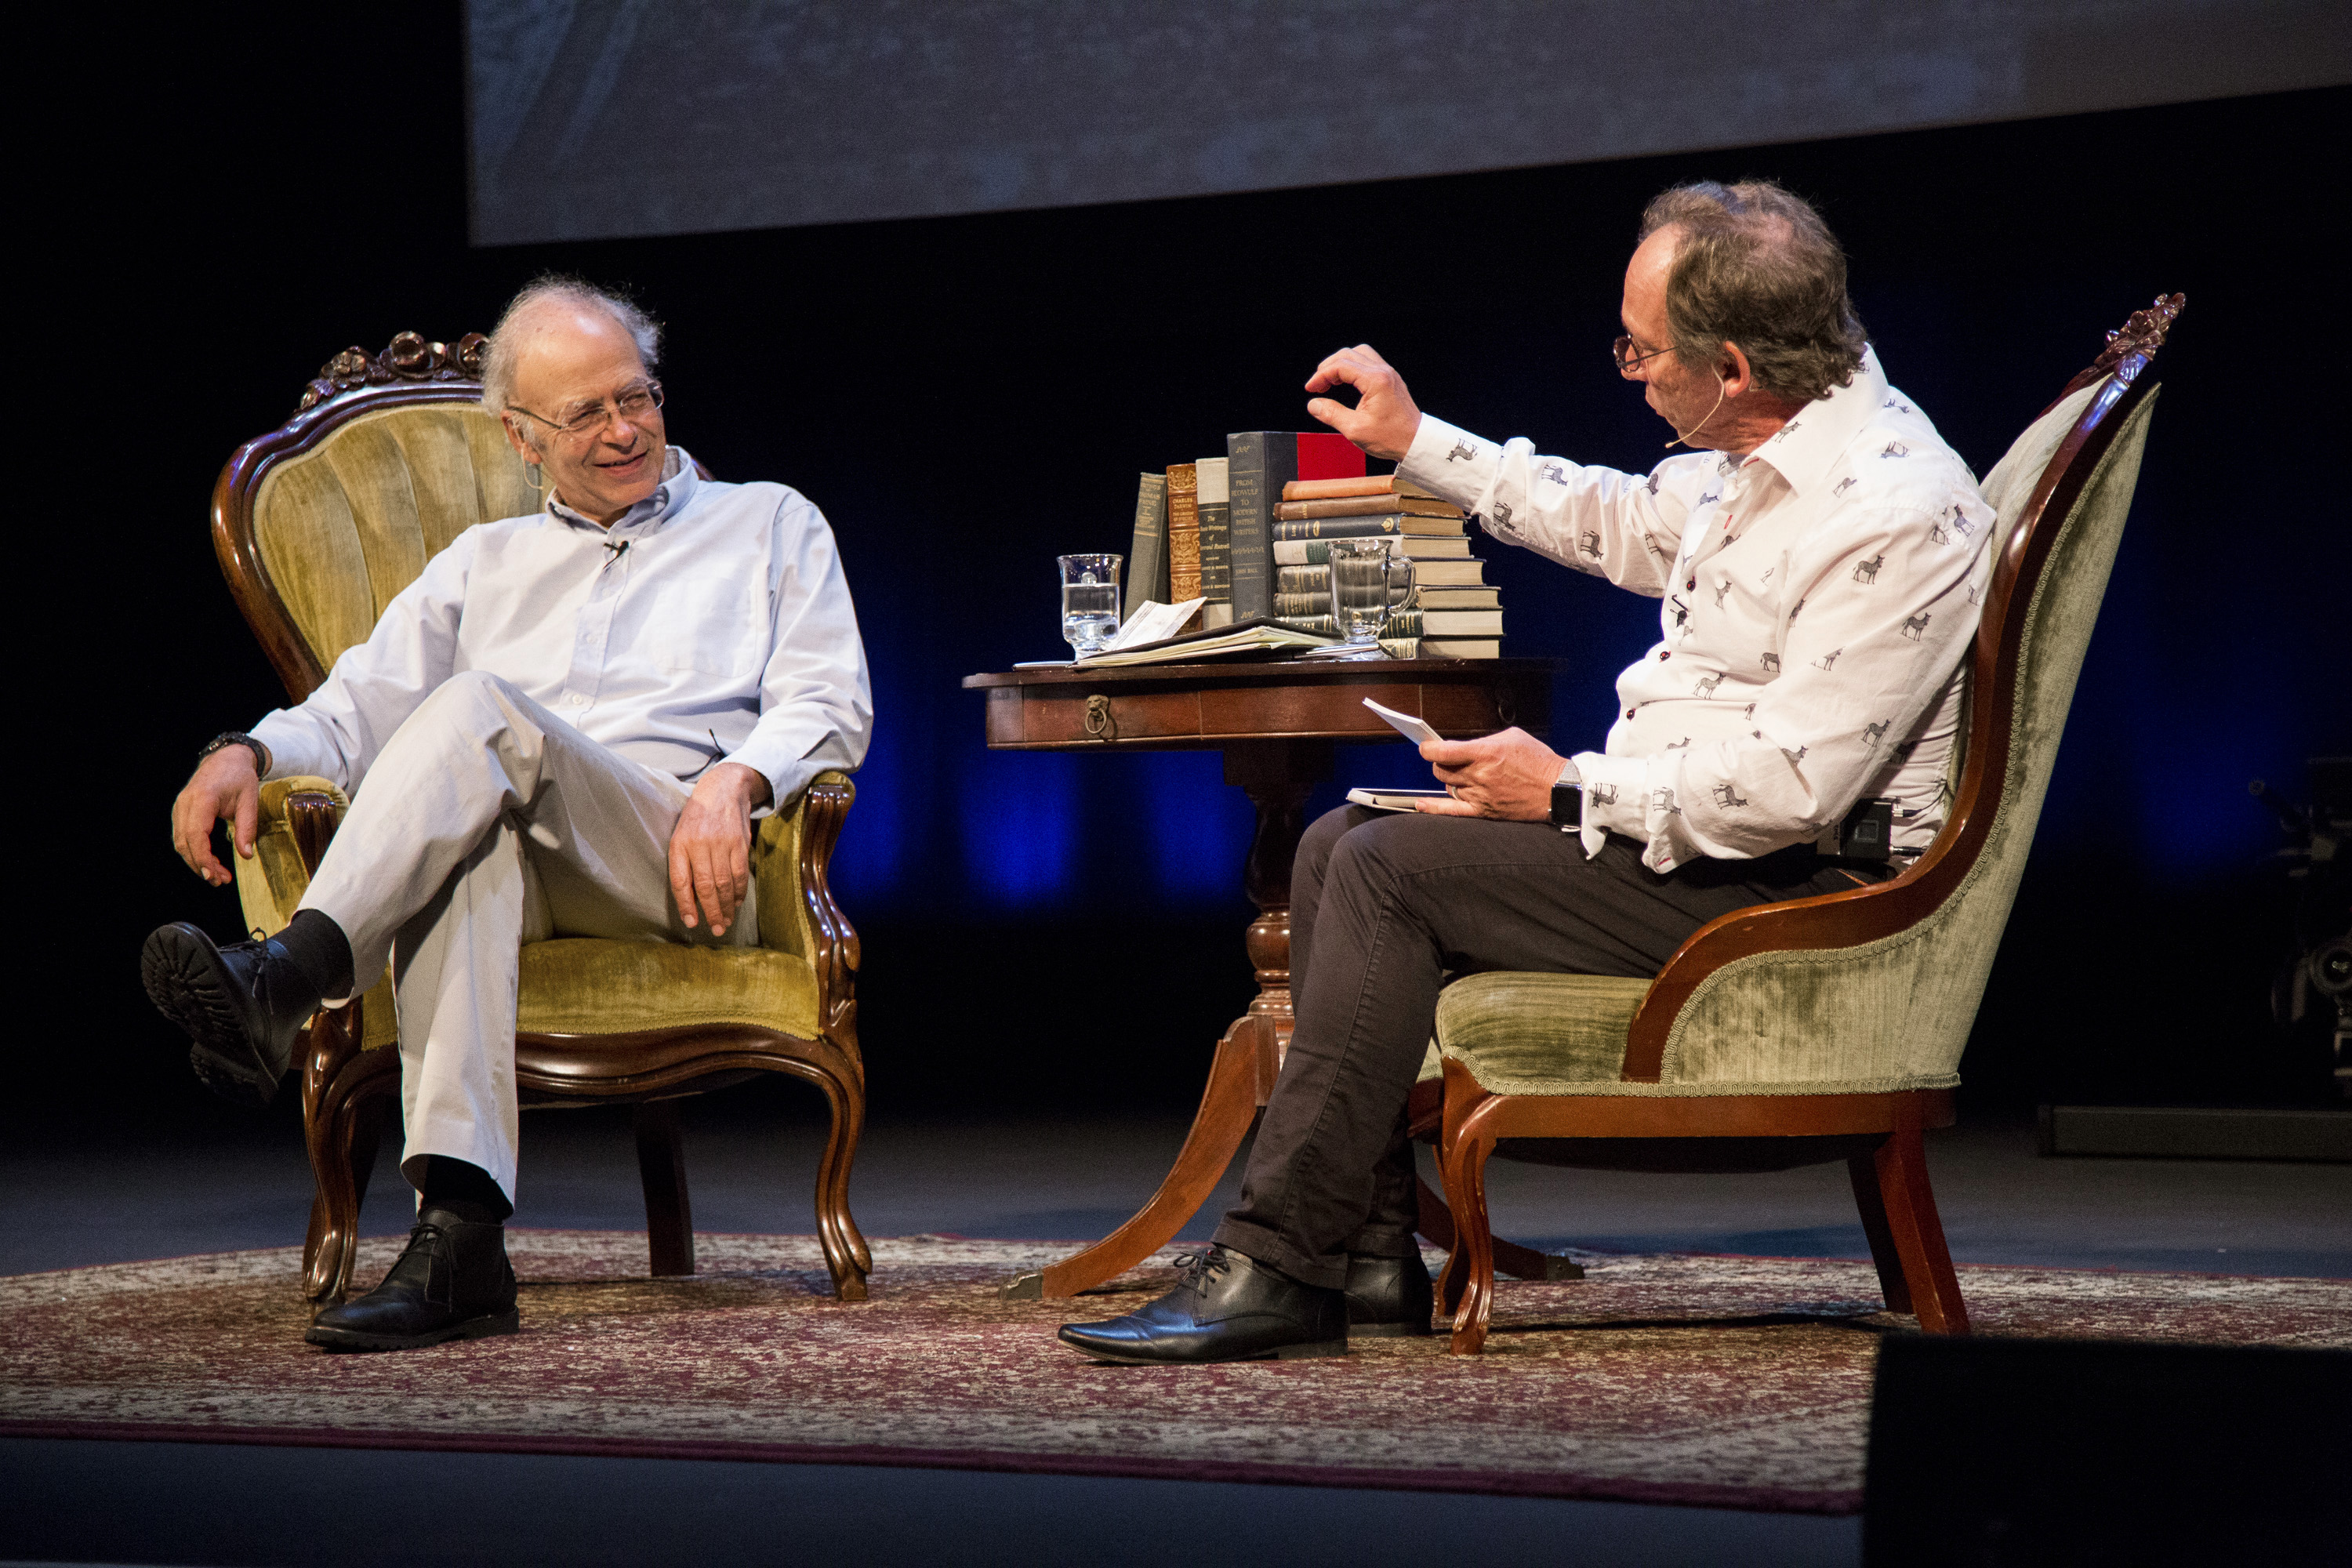 Animal-rights philosopher Peter Singer and theoretical physicist Lawrence Krauss